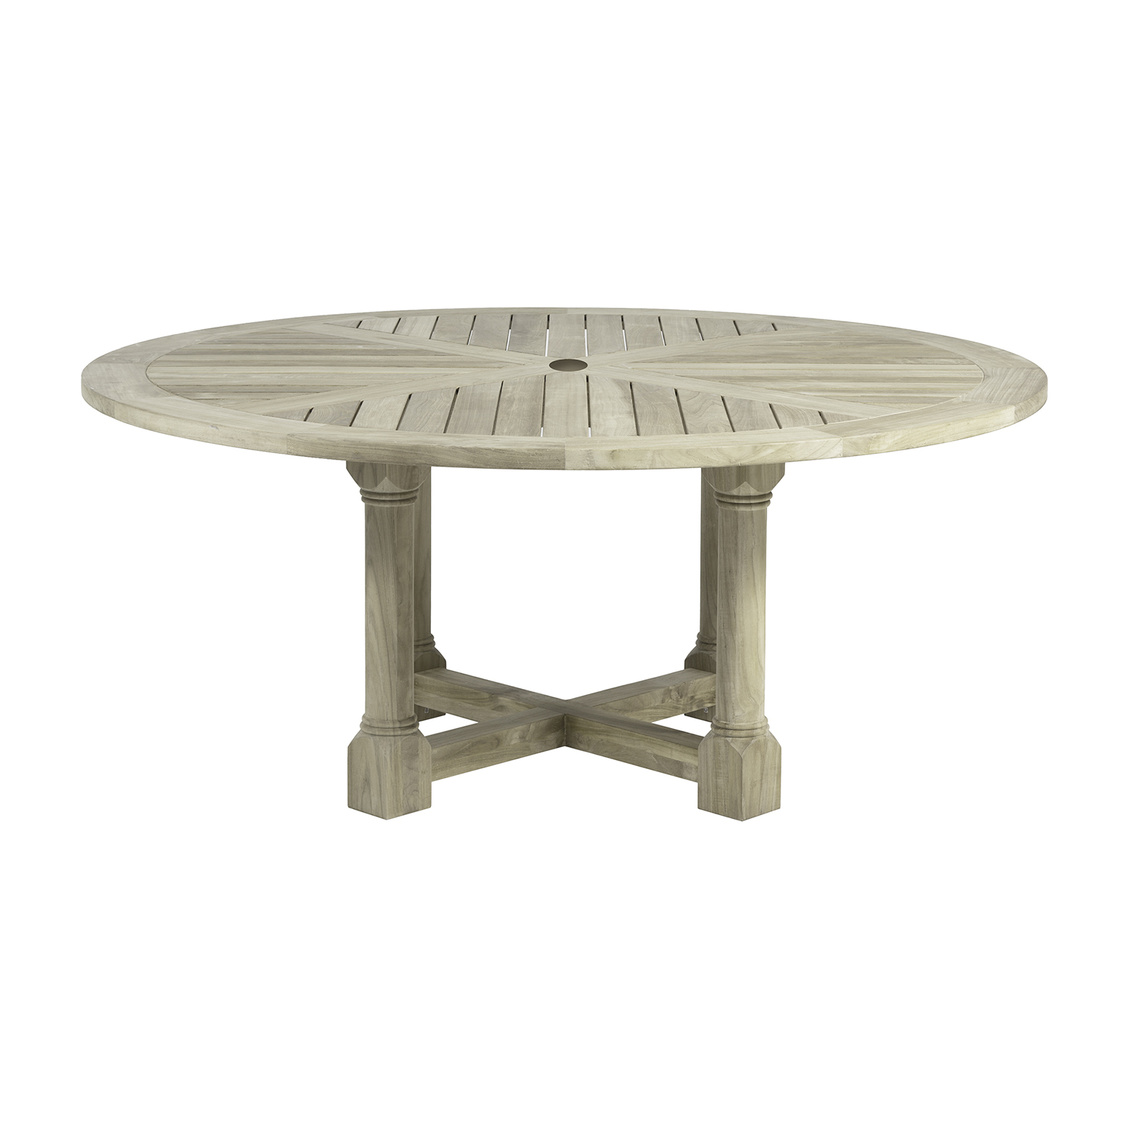 lakeshore 72 inch round dt in oyster teak (w/ hole) product image